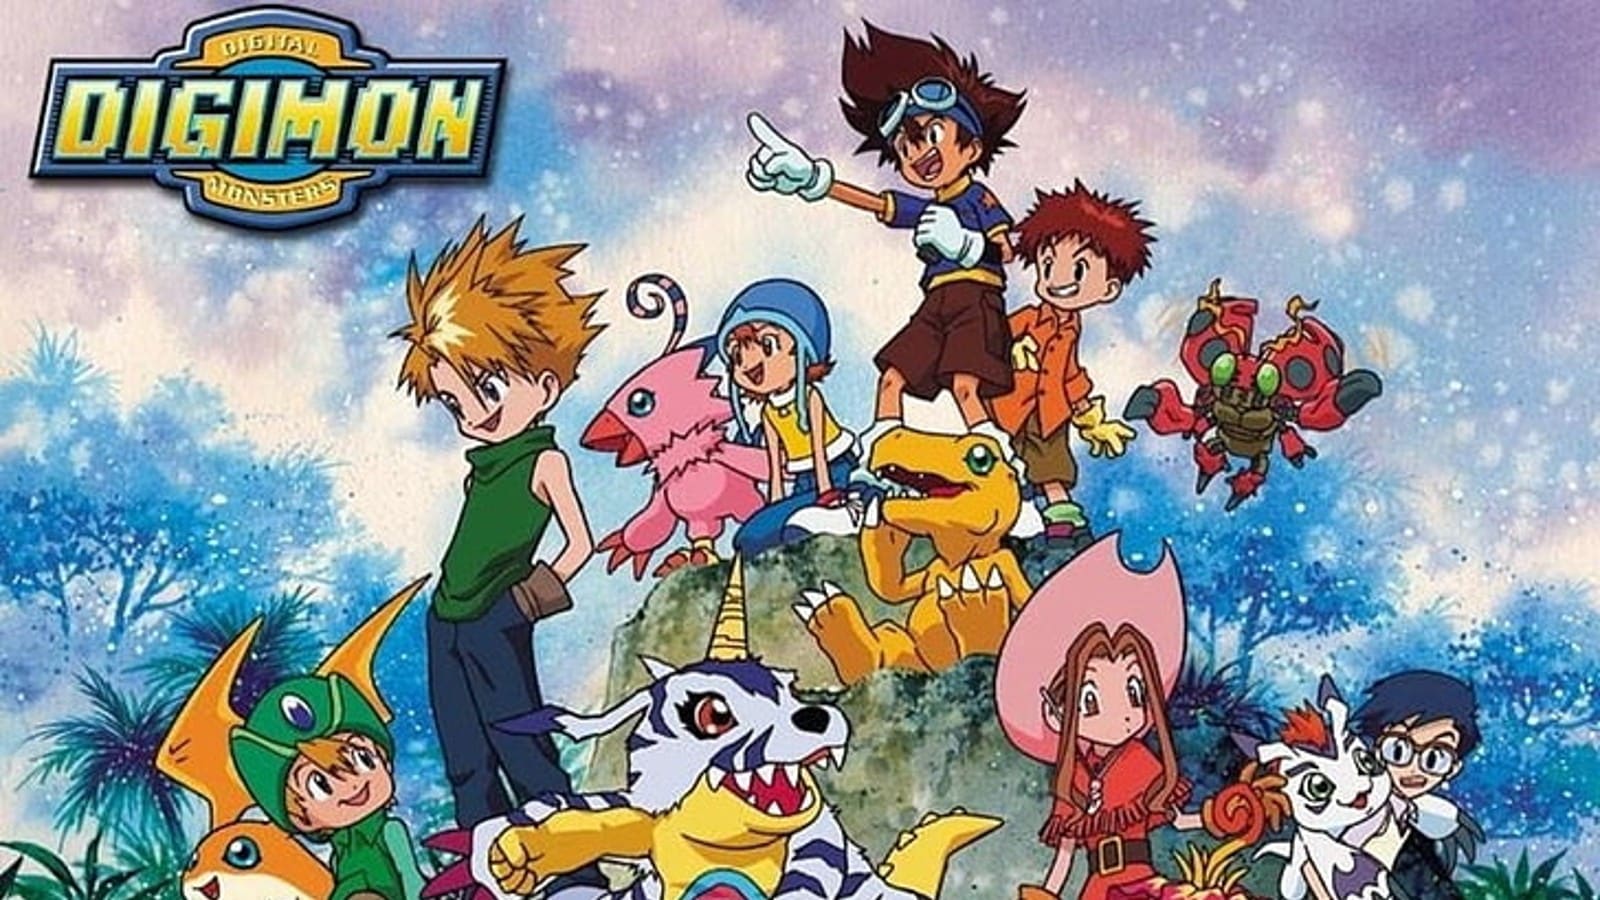 fan made digimon game